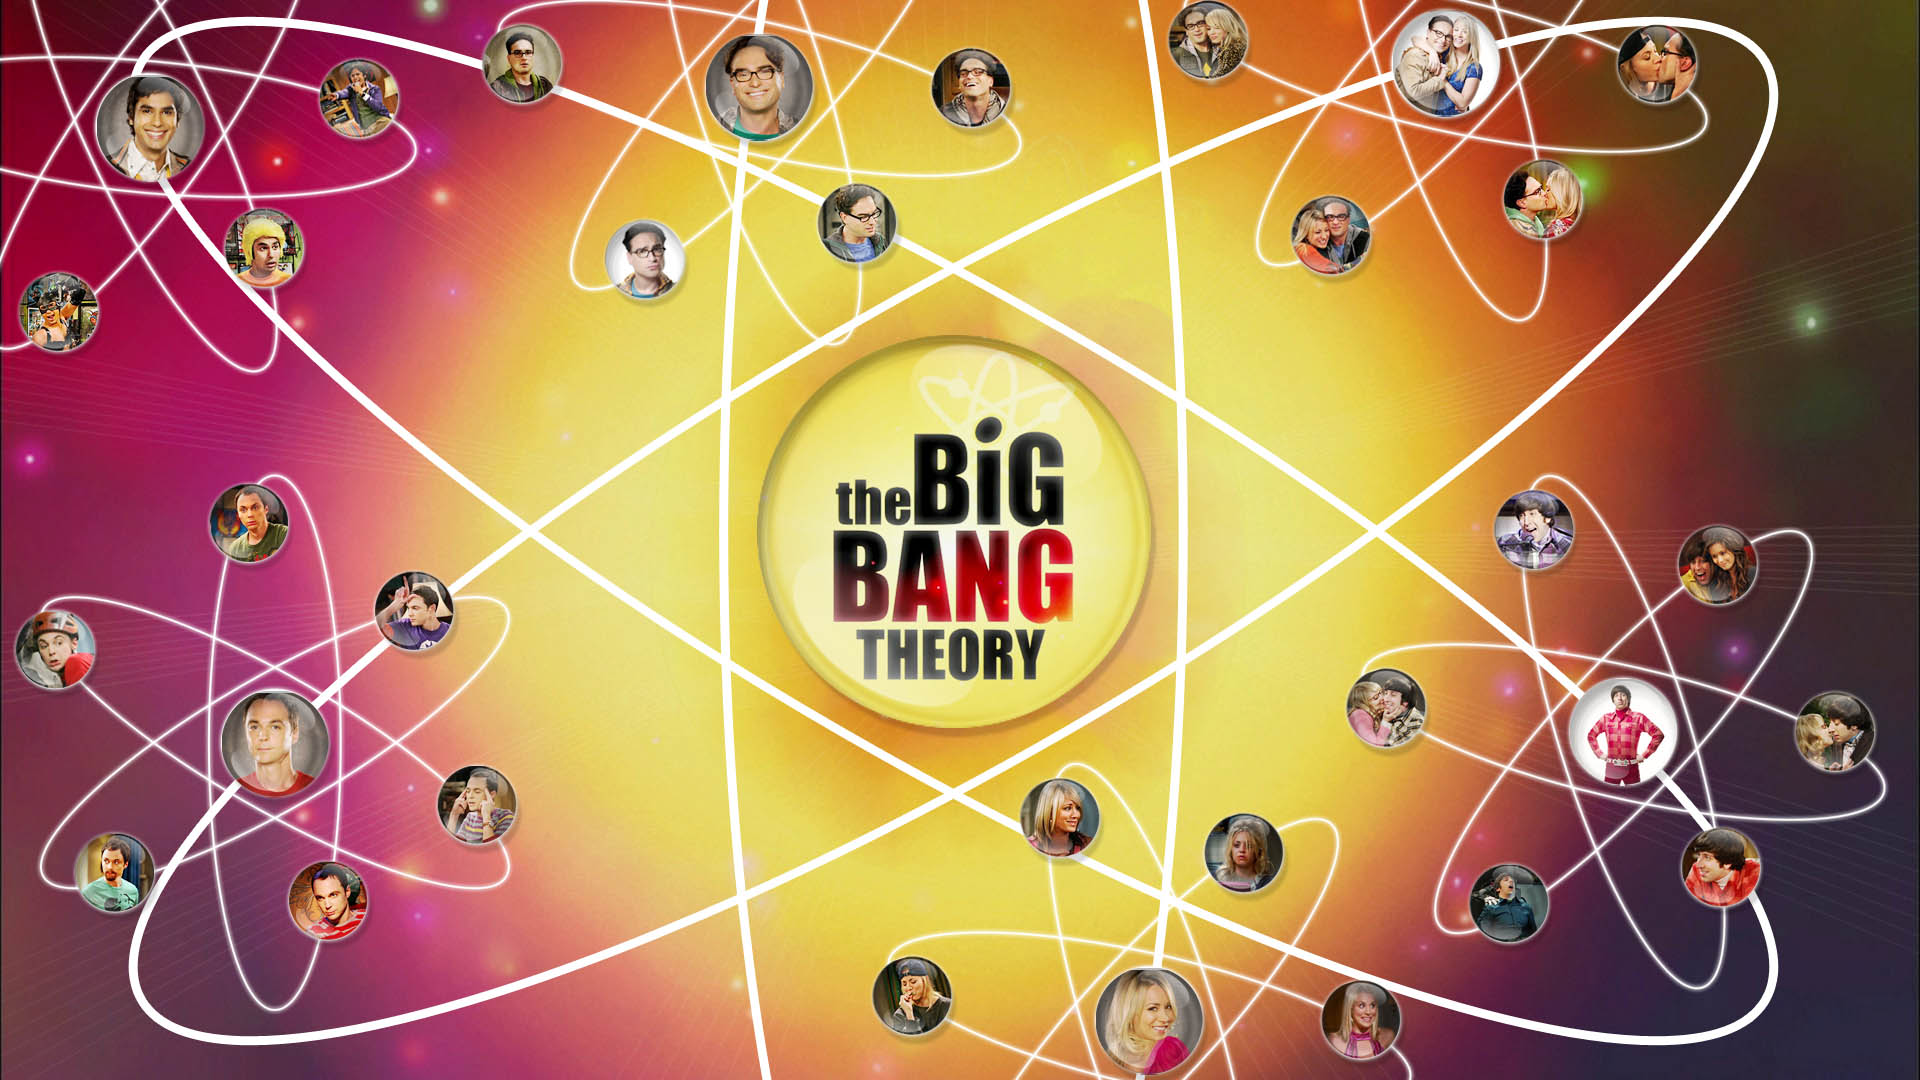 The Big Bang Theory #308334 | Full HD Widescreen wallpapers for ...